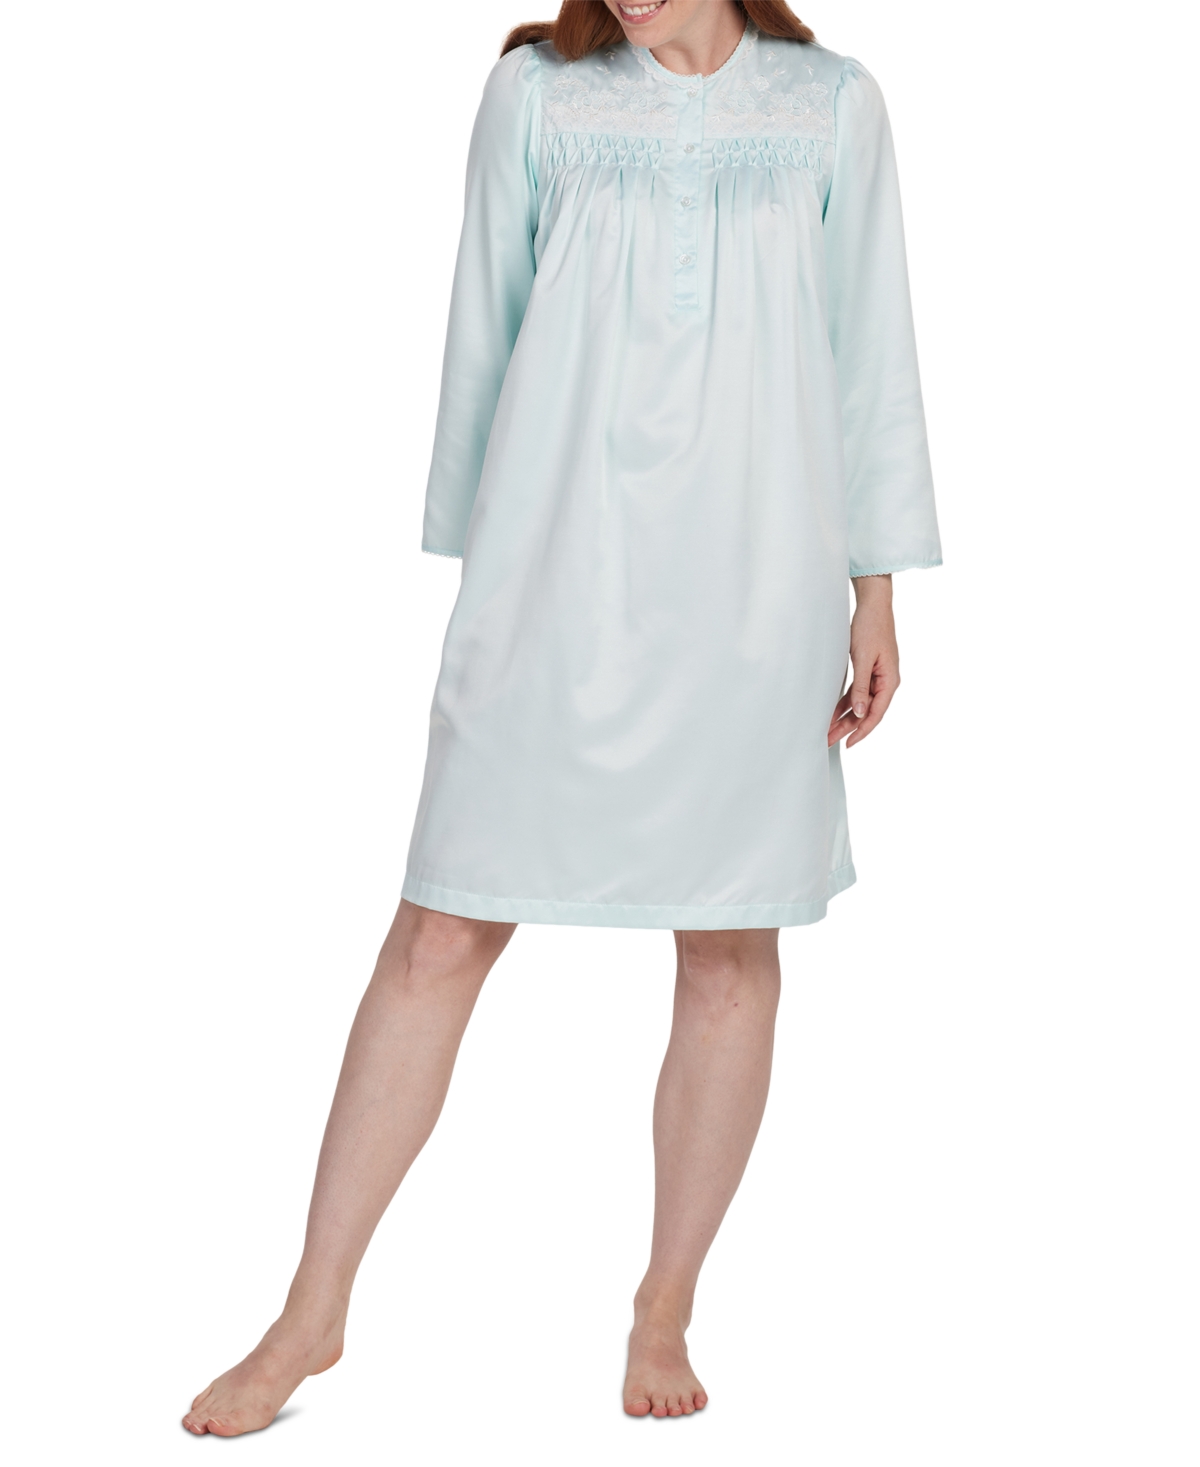 Women's Embroidered Short Nightgown - Turquoise